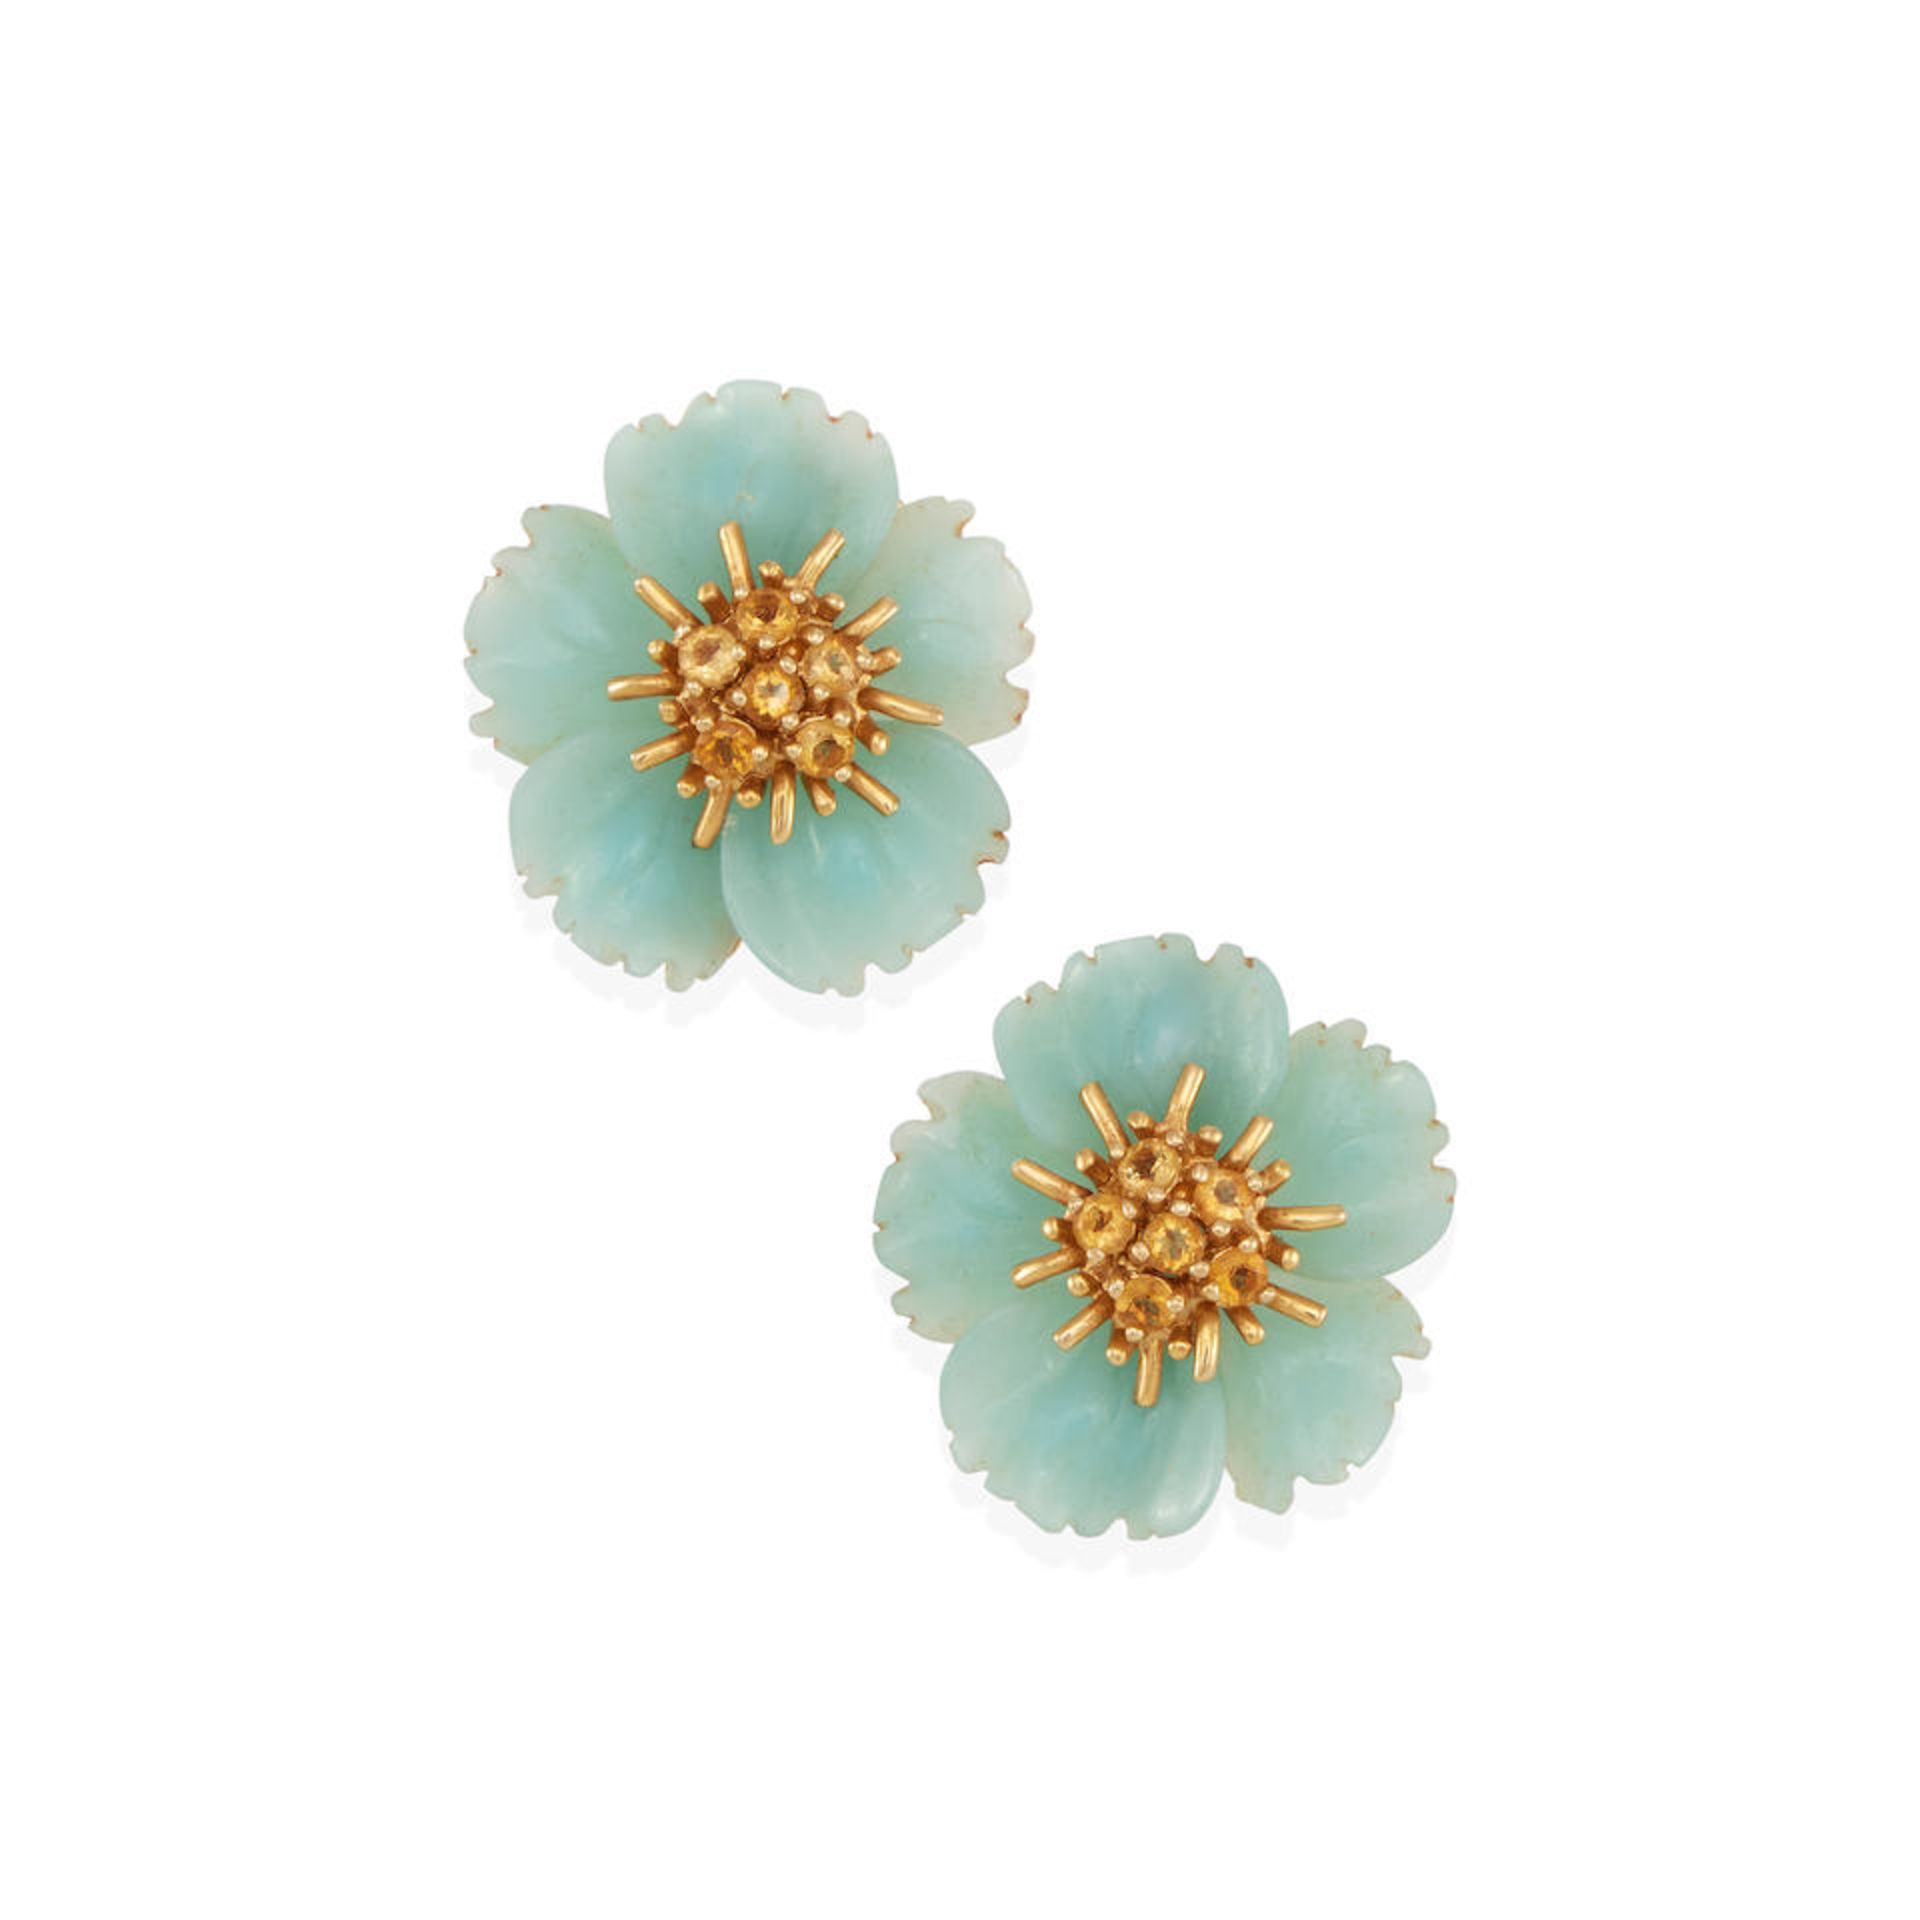 A PAIR OF 18K GOLD AND GEM-SET FLORAL EARRINGS